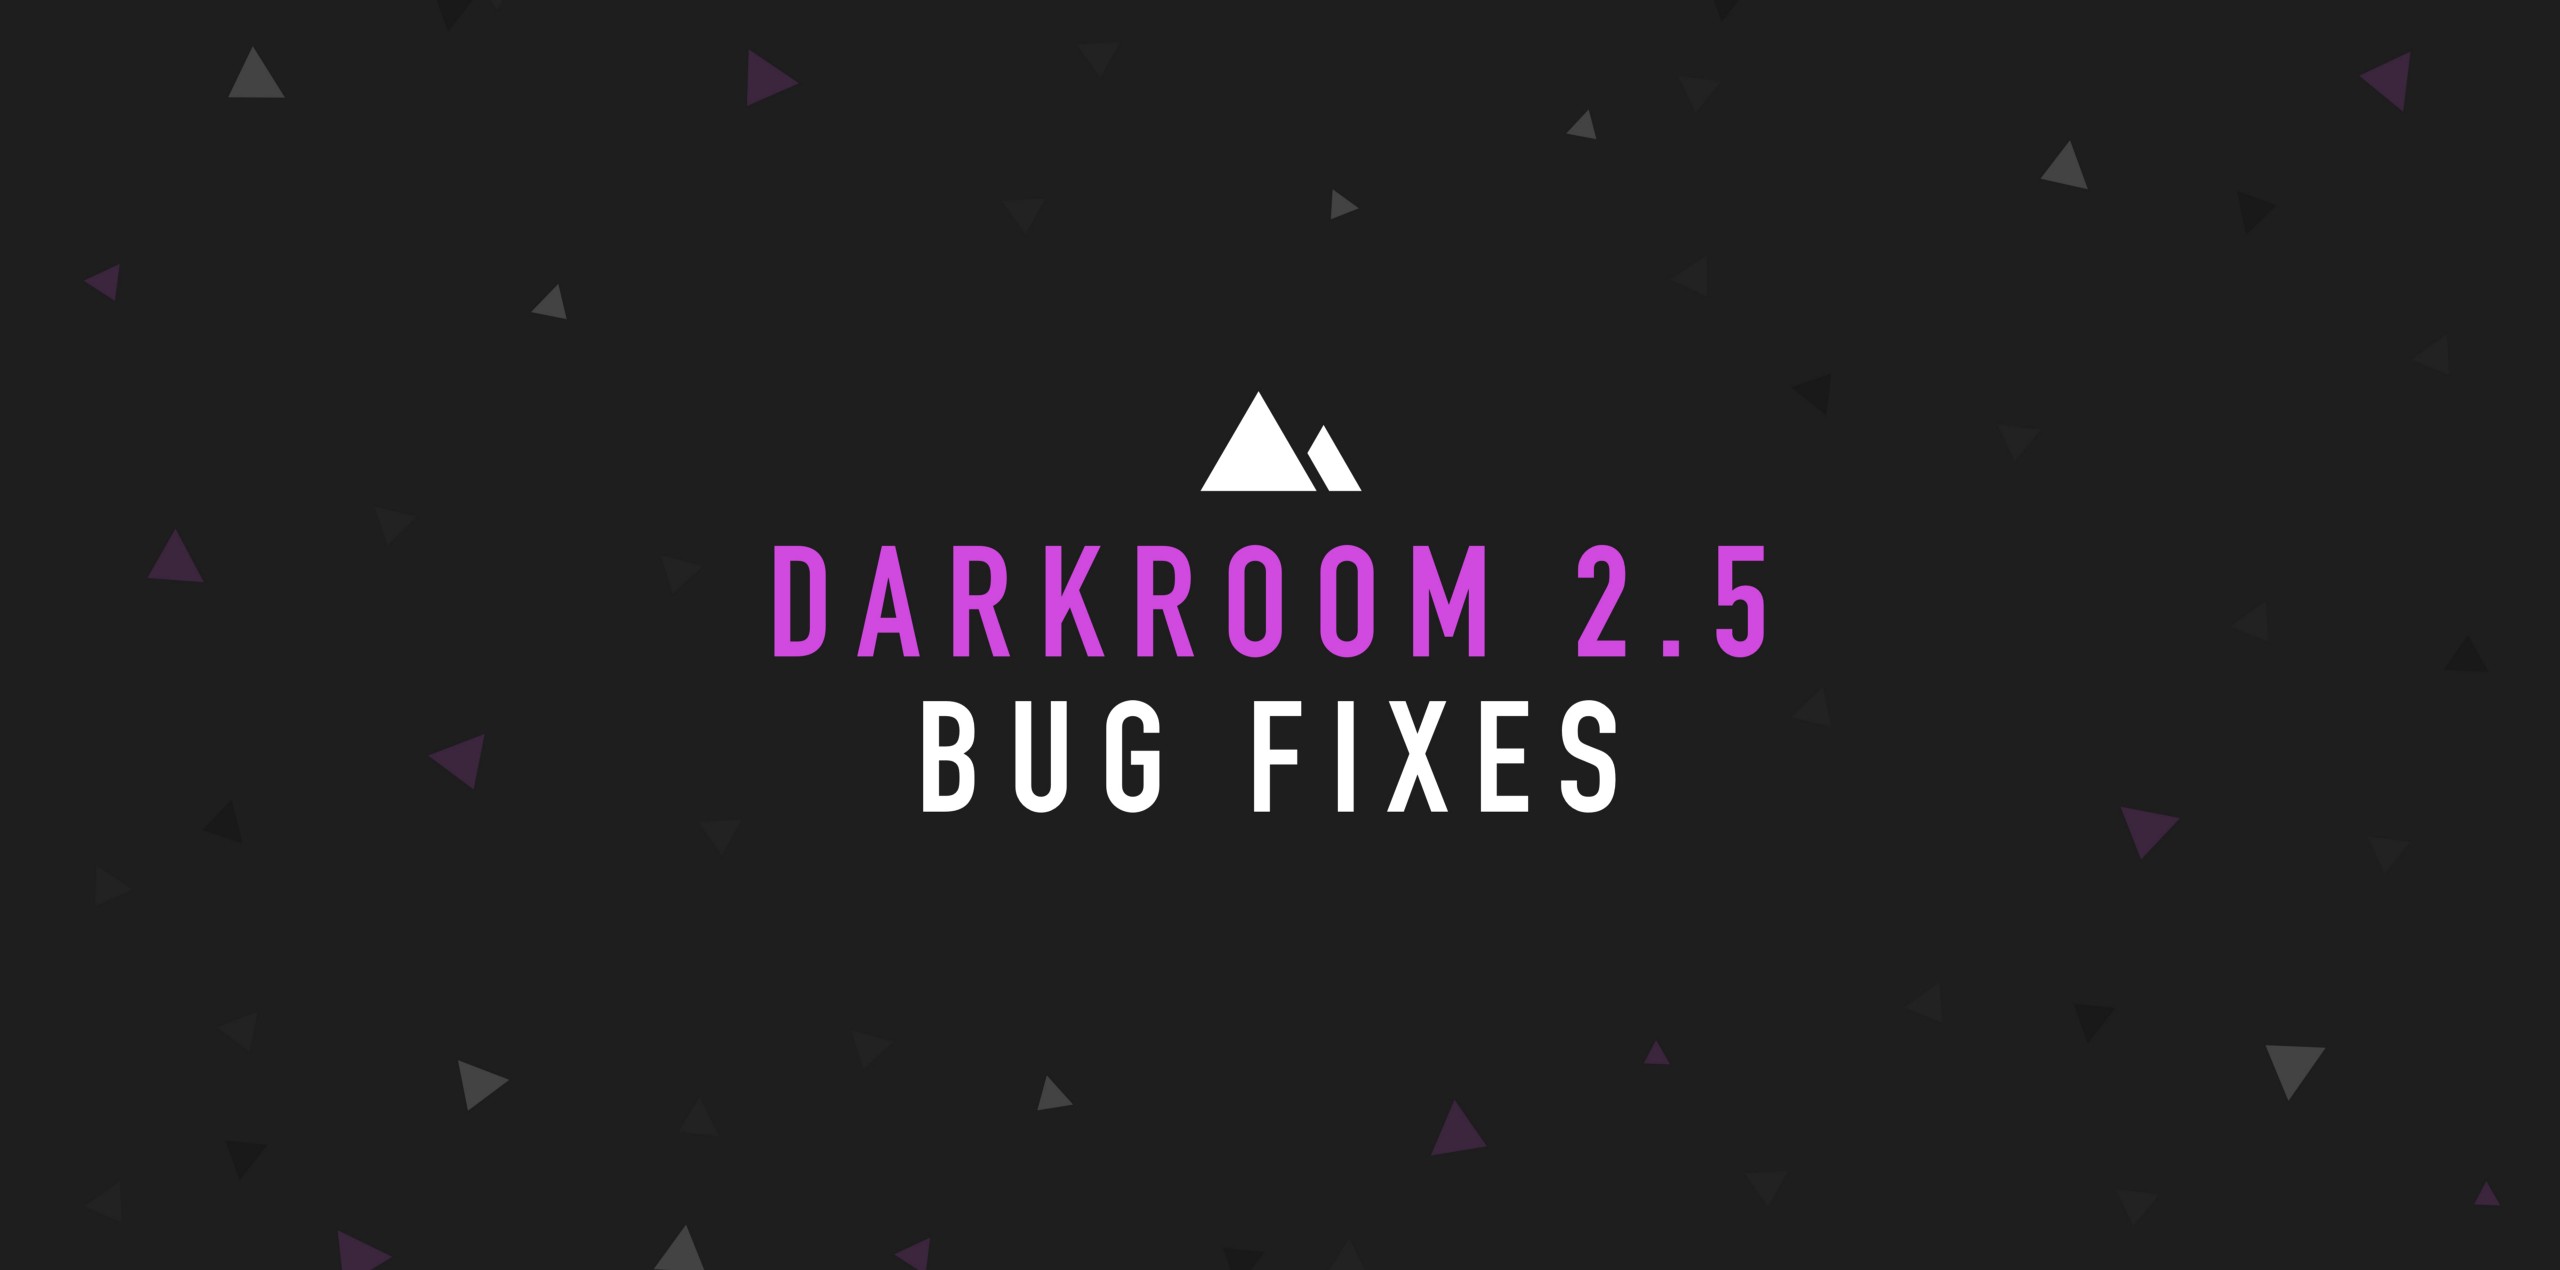 Cover Image for Darkrooms 2.1, 2.2, and 2.3